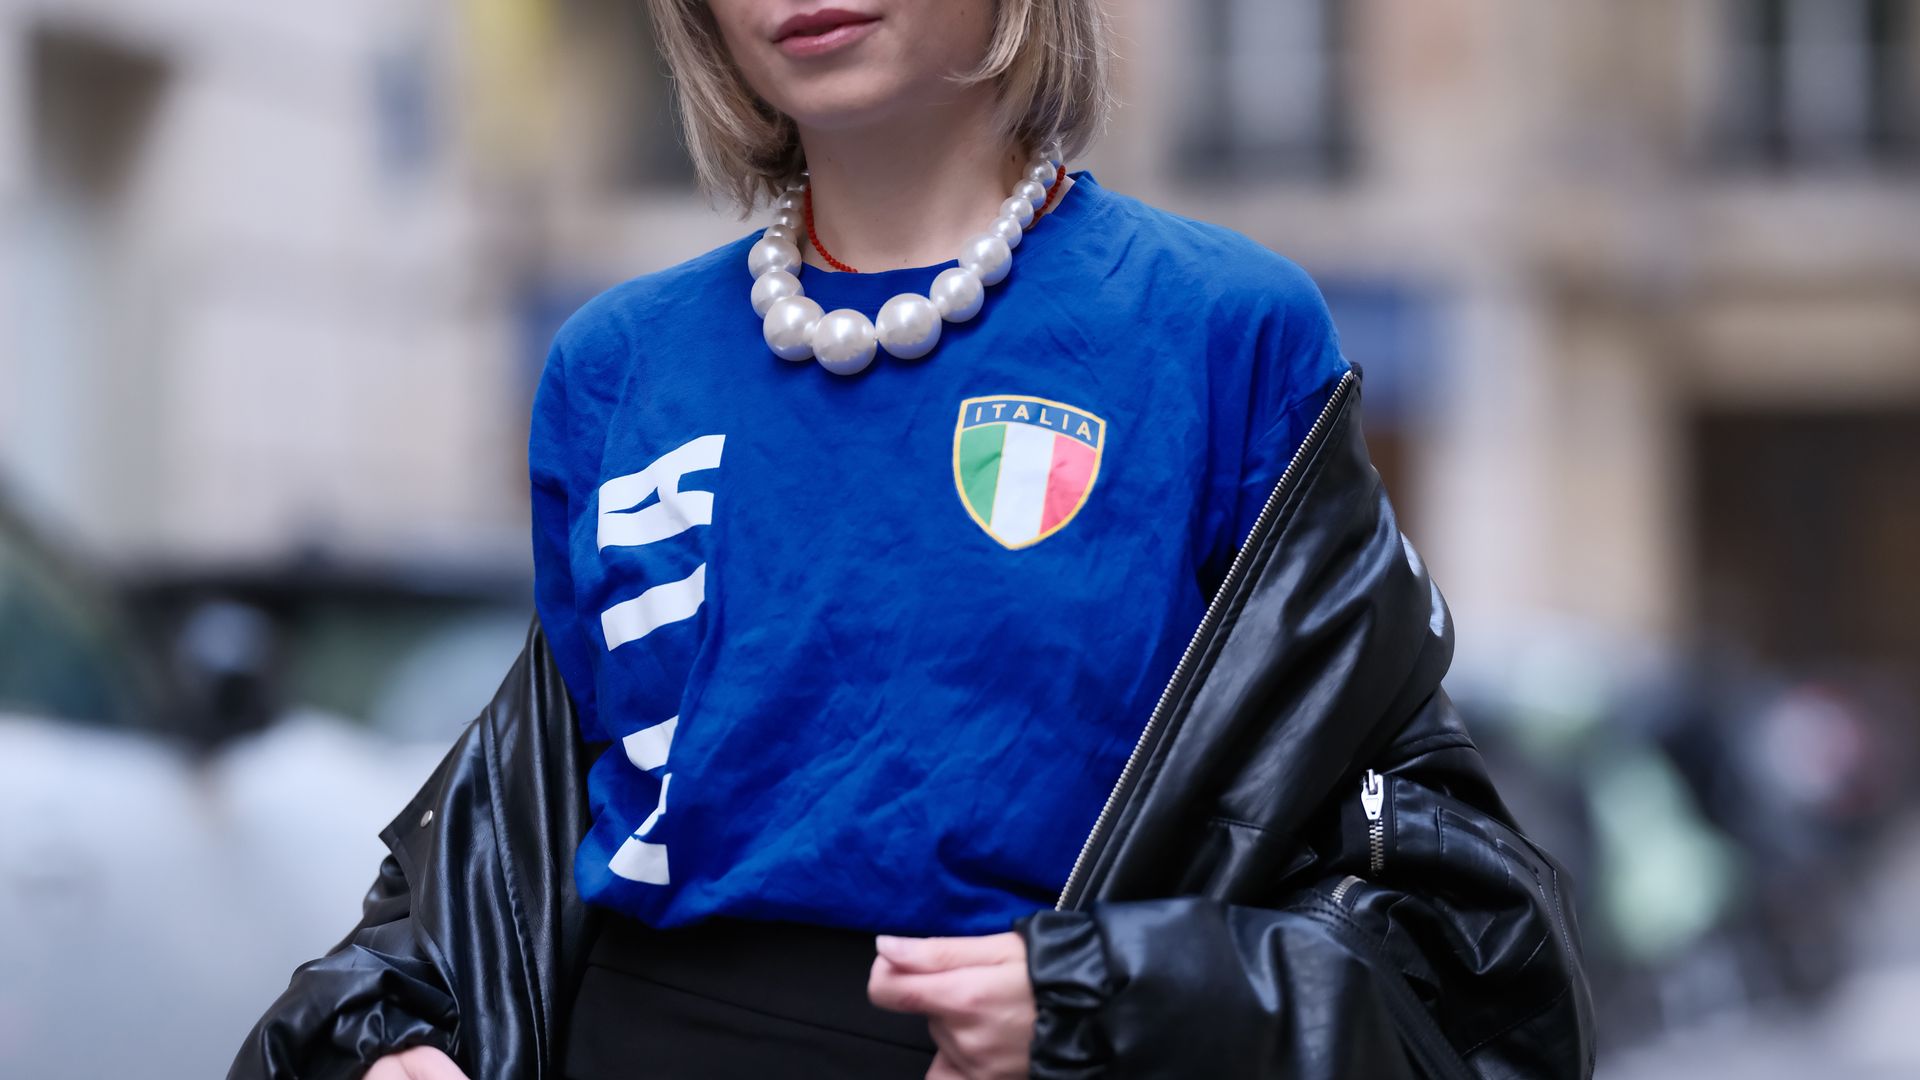 Emy Venturini wears a blue football vintage t-shirt Italia with a printed Italian flag, a black mini skirt from Zara, black bejeweled embellished shoes from Miu Miu, a necklace with large pearls